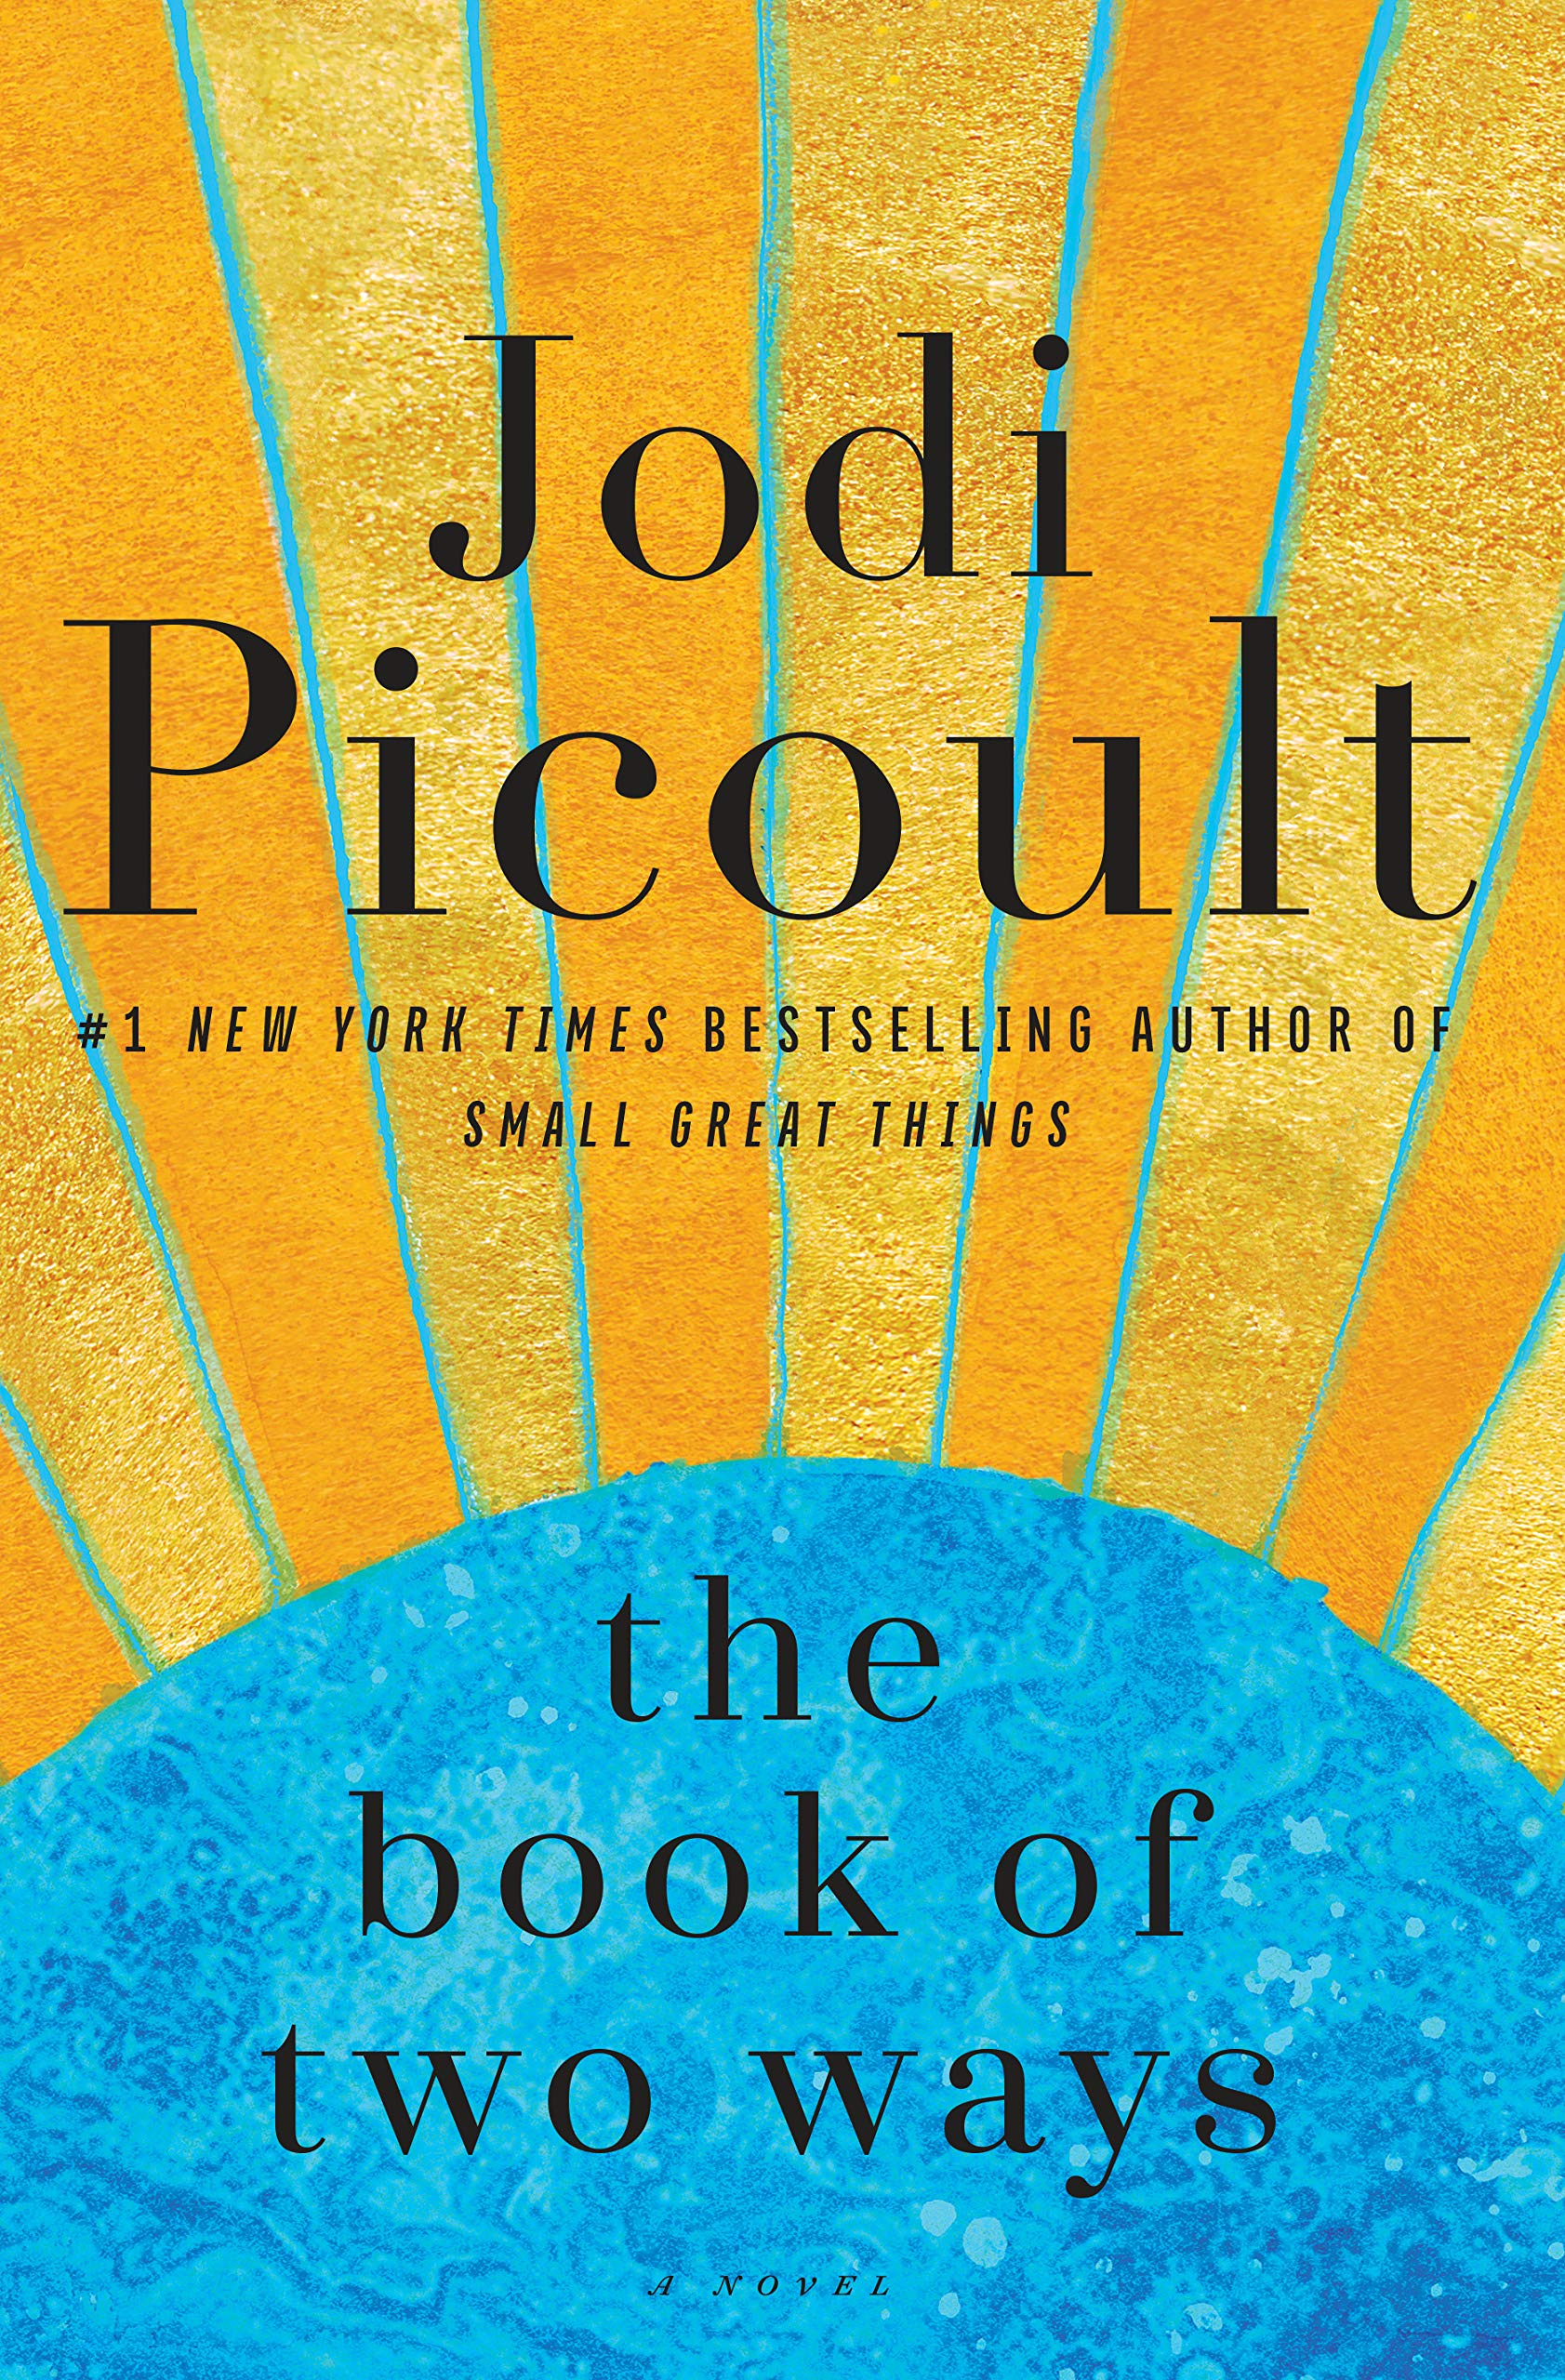 Cover of The Book of Two Ways by Jodi Picoult